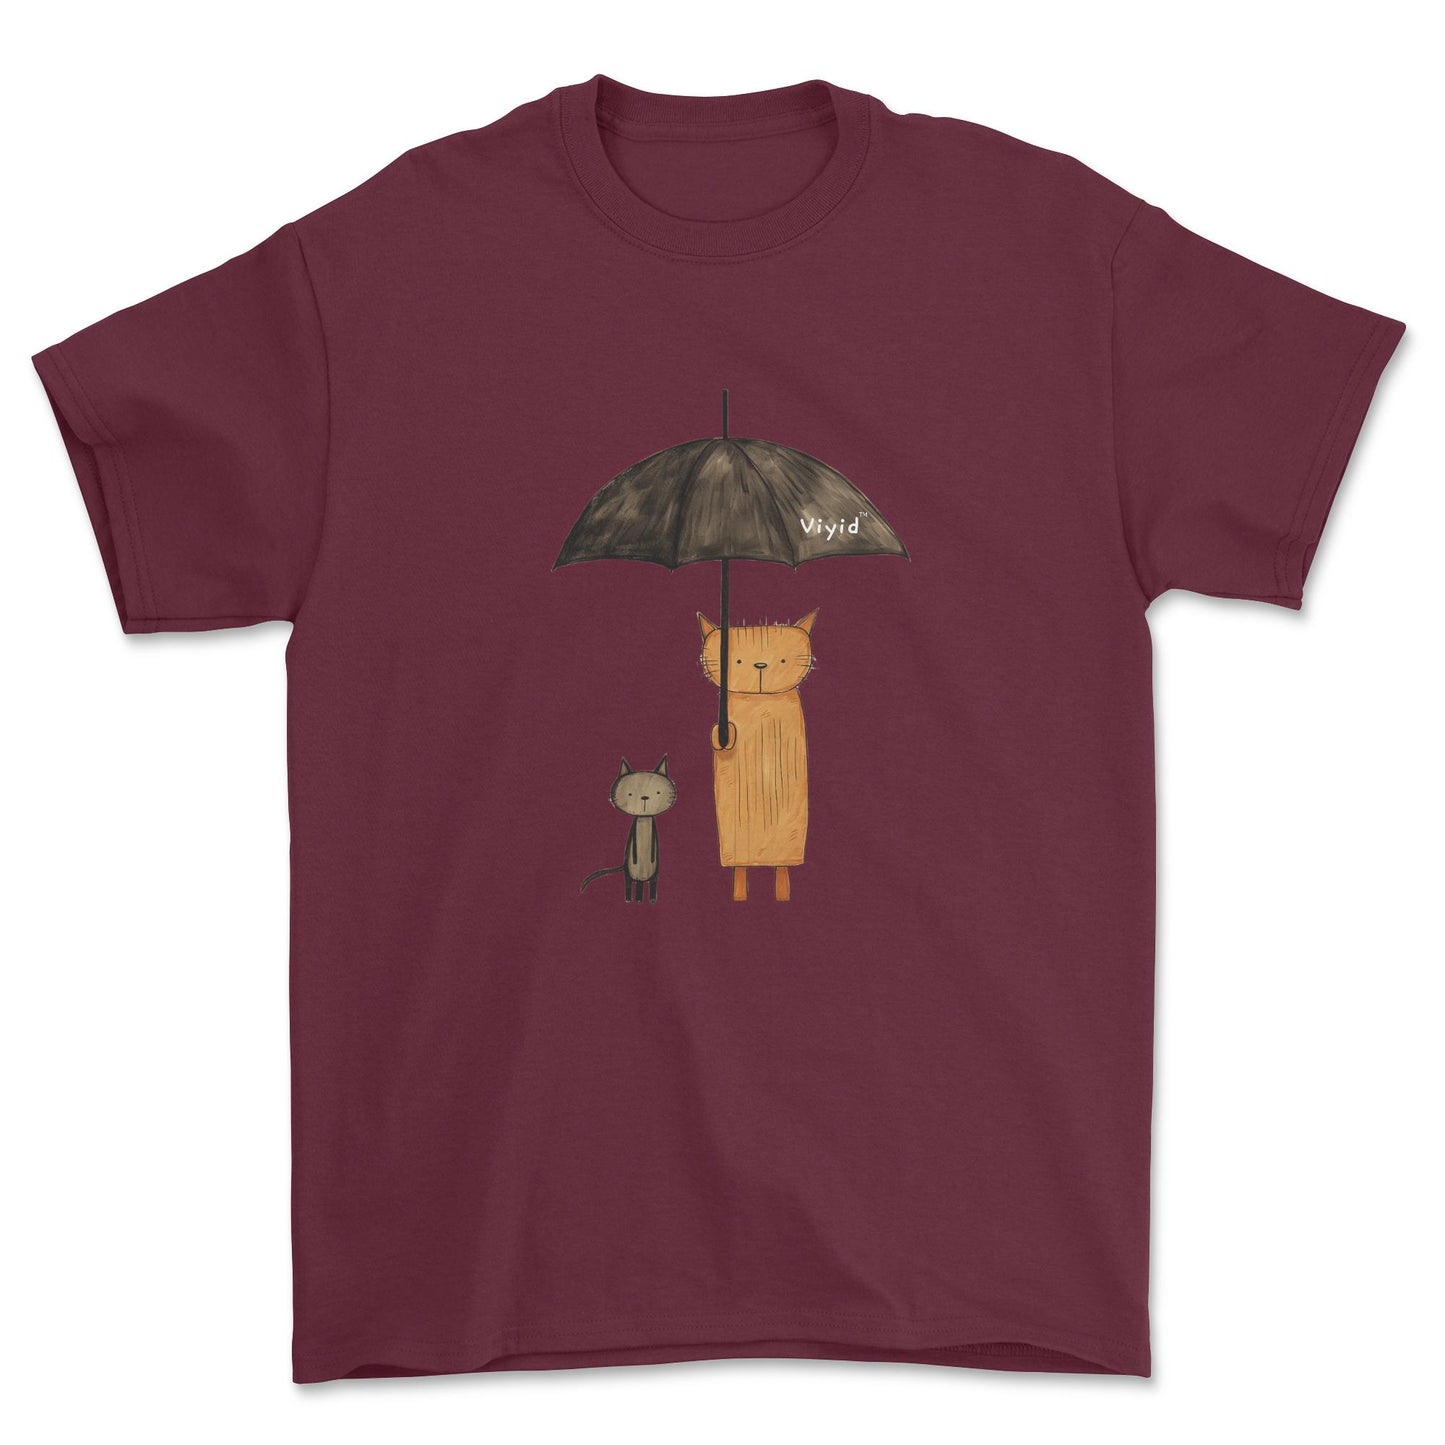 abstract cats with umbrella adult t-shirt maroon